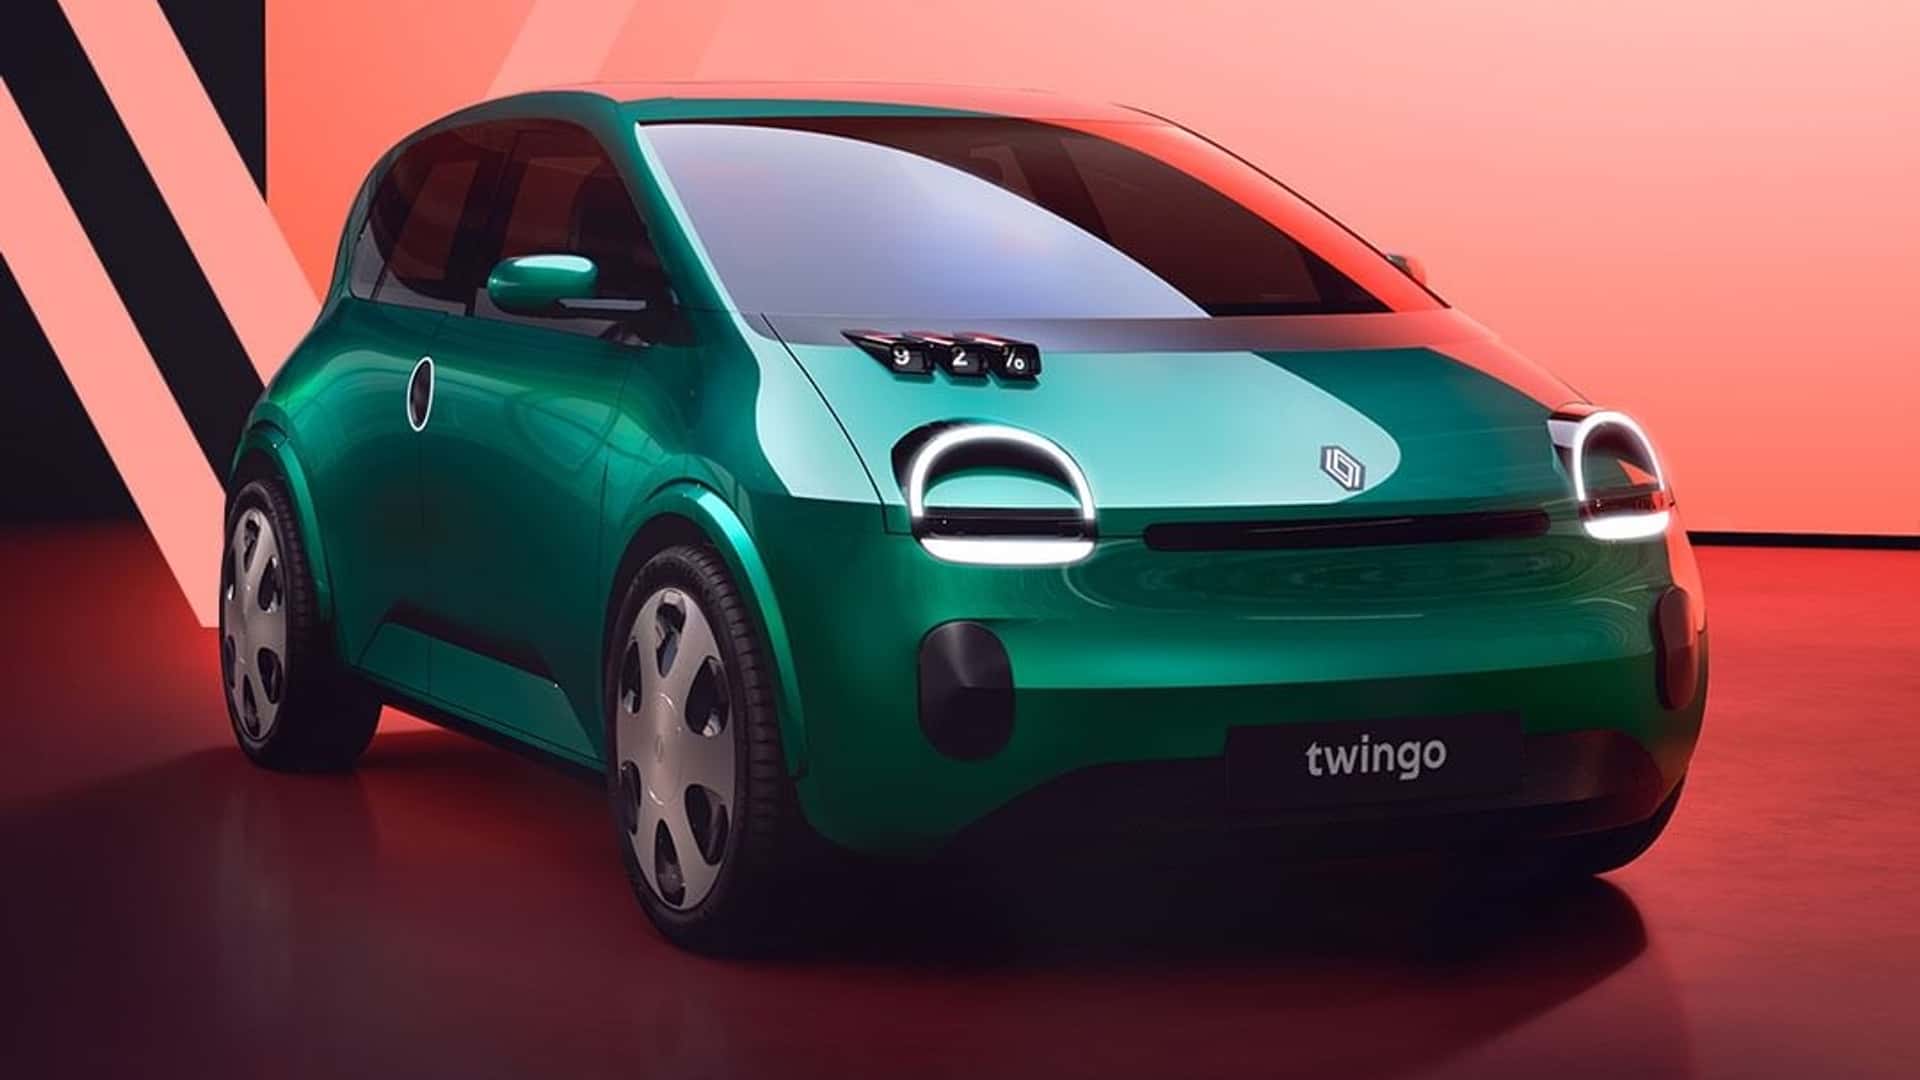 renault revives iconic twingo as an affordable electric hatchback